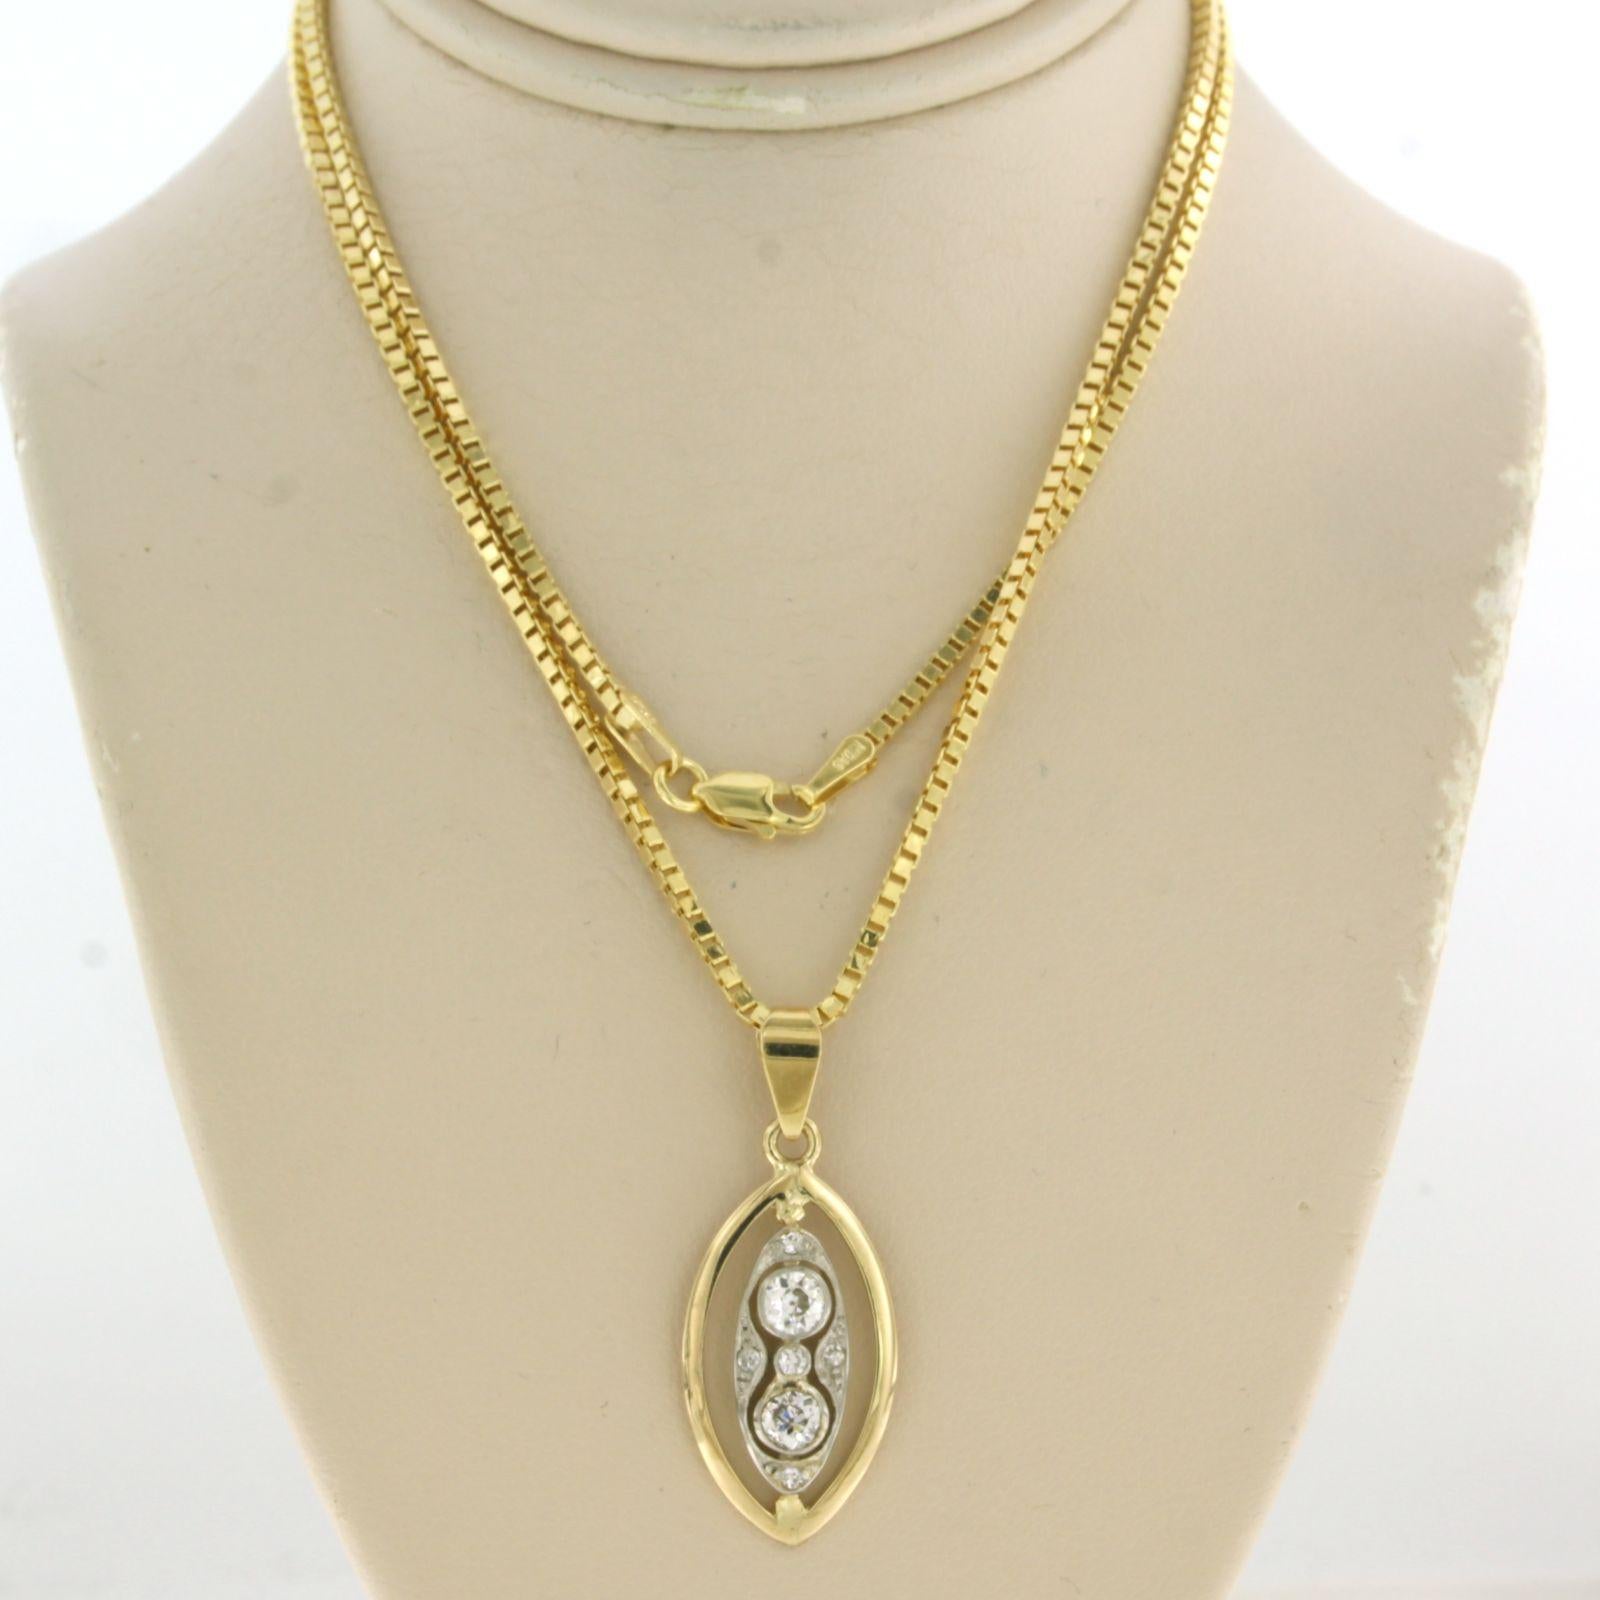 14k yellow gold necklace and pendant set with old European cut diamonds up to . 0.60ct - F/G - VS/SI - 50 cm long

detailed description:

the necklace is 50 cm long and 1.5 mm wide

the pendant is 3.1 cm long by 1.2 cm wide

weight 6.3